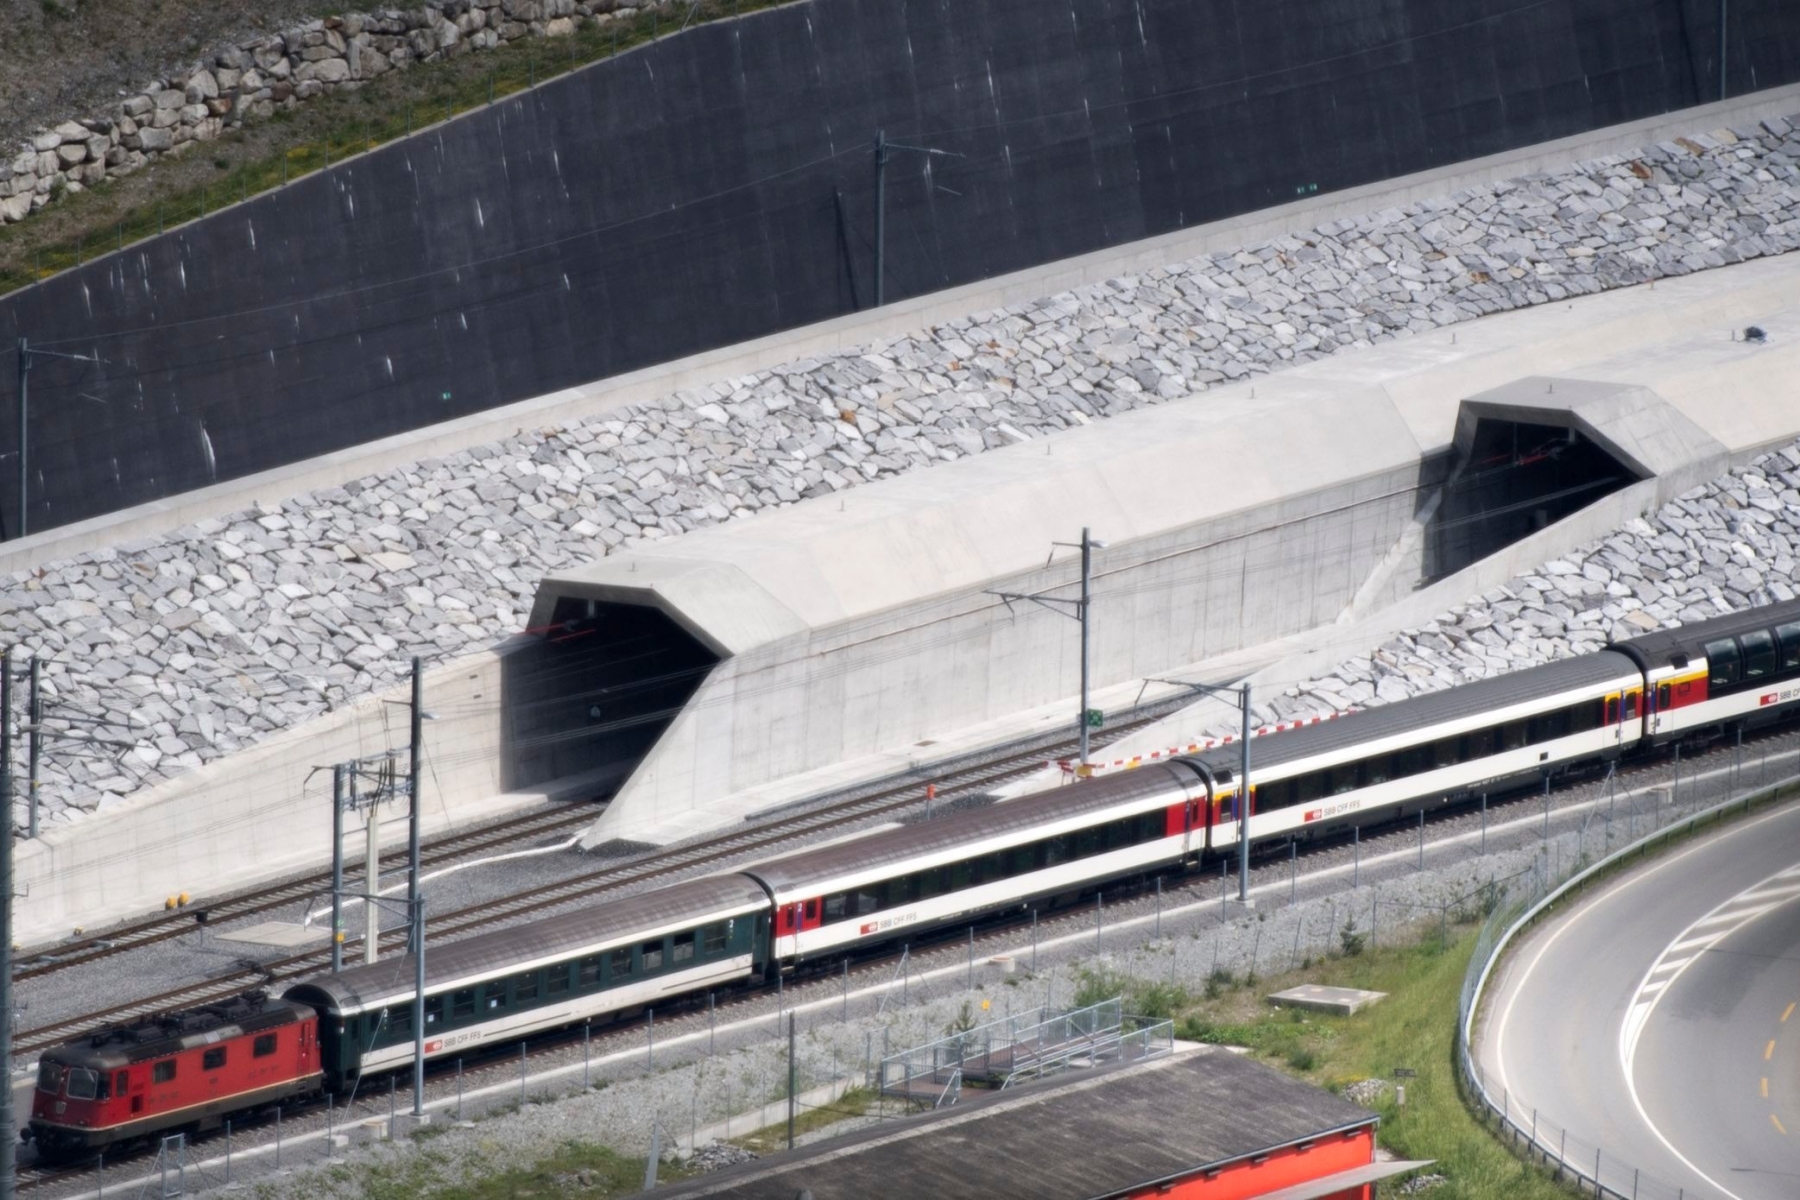 A train passes in front of the northern portal of the Gotthard Base Tunnel on the eve of its inauguration, in Erstfeld, Canton of Uri, Switzerland, Tuesday, May 31, 2016. The Gotthard Base Tunnel, world's longest railway tunnel, consists of two 57-kilometres-long single-track tubes. It joins the north portal at Erstfeld to the south portal at Bodio. The inauguration of the Gotthard Base Tunnel takes place on June 1st. (KEYSTONE/Laurent Gillieron) SWITZERLAND GOTTHARD TUNNEL OPENING